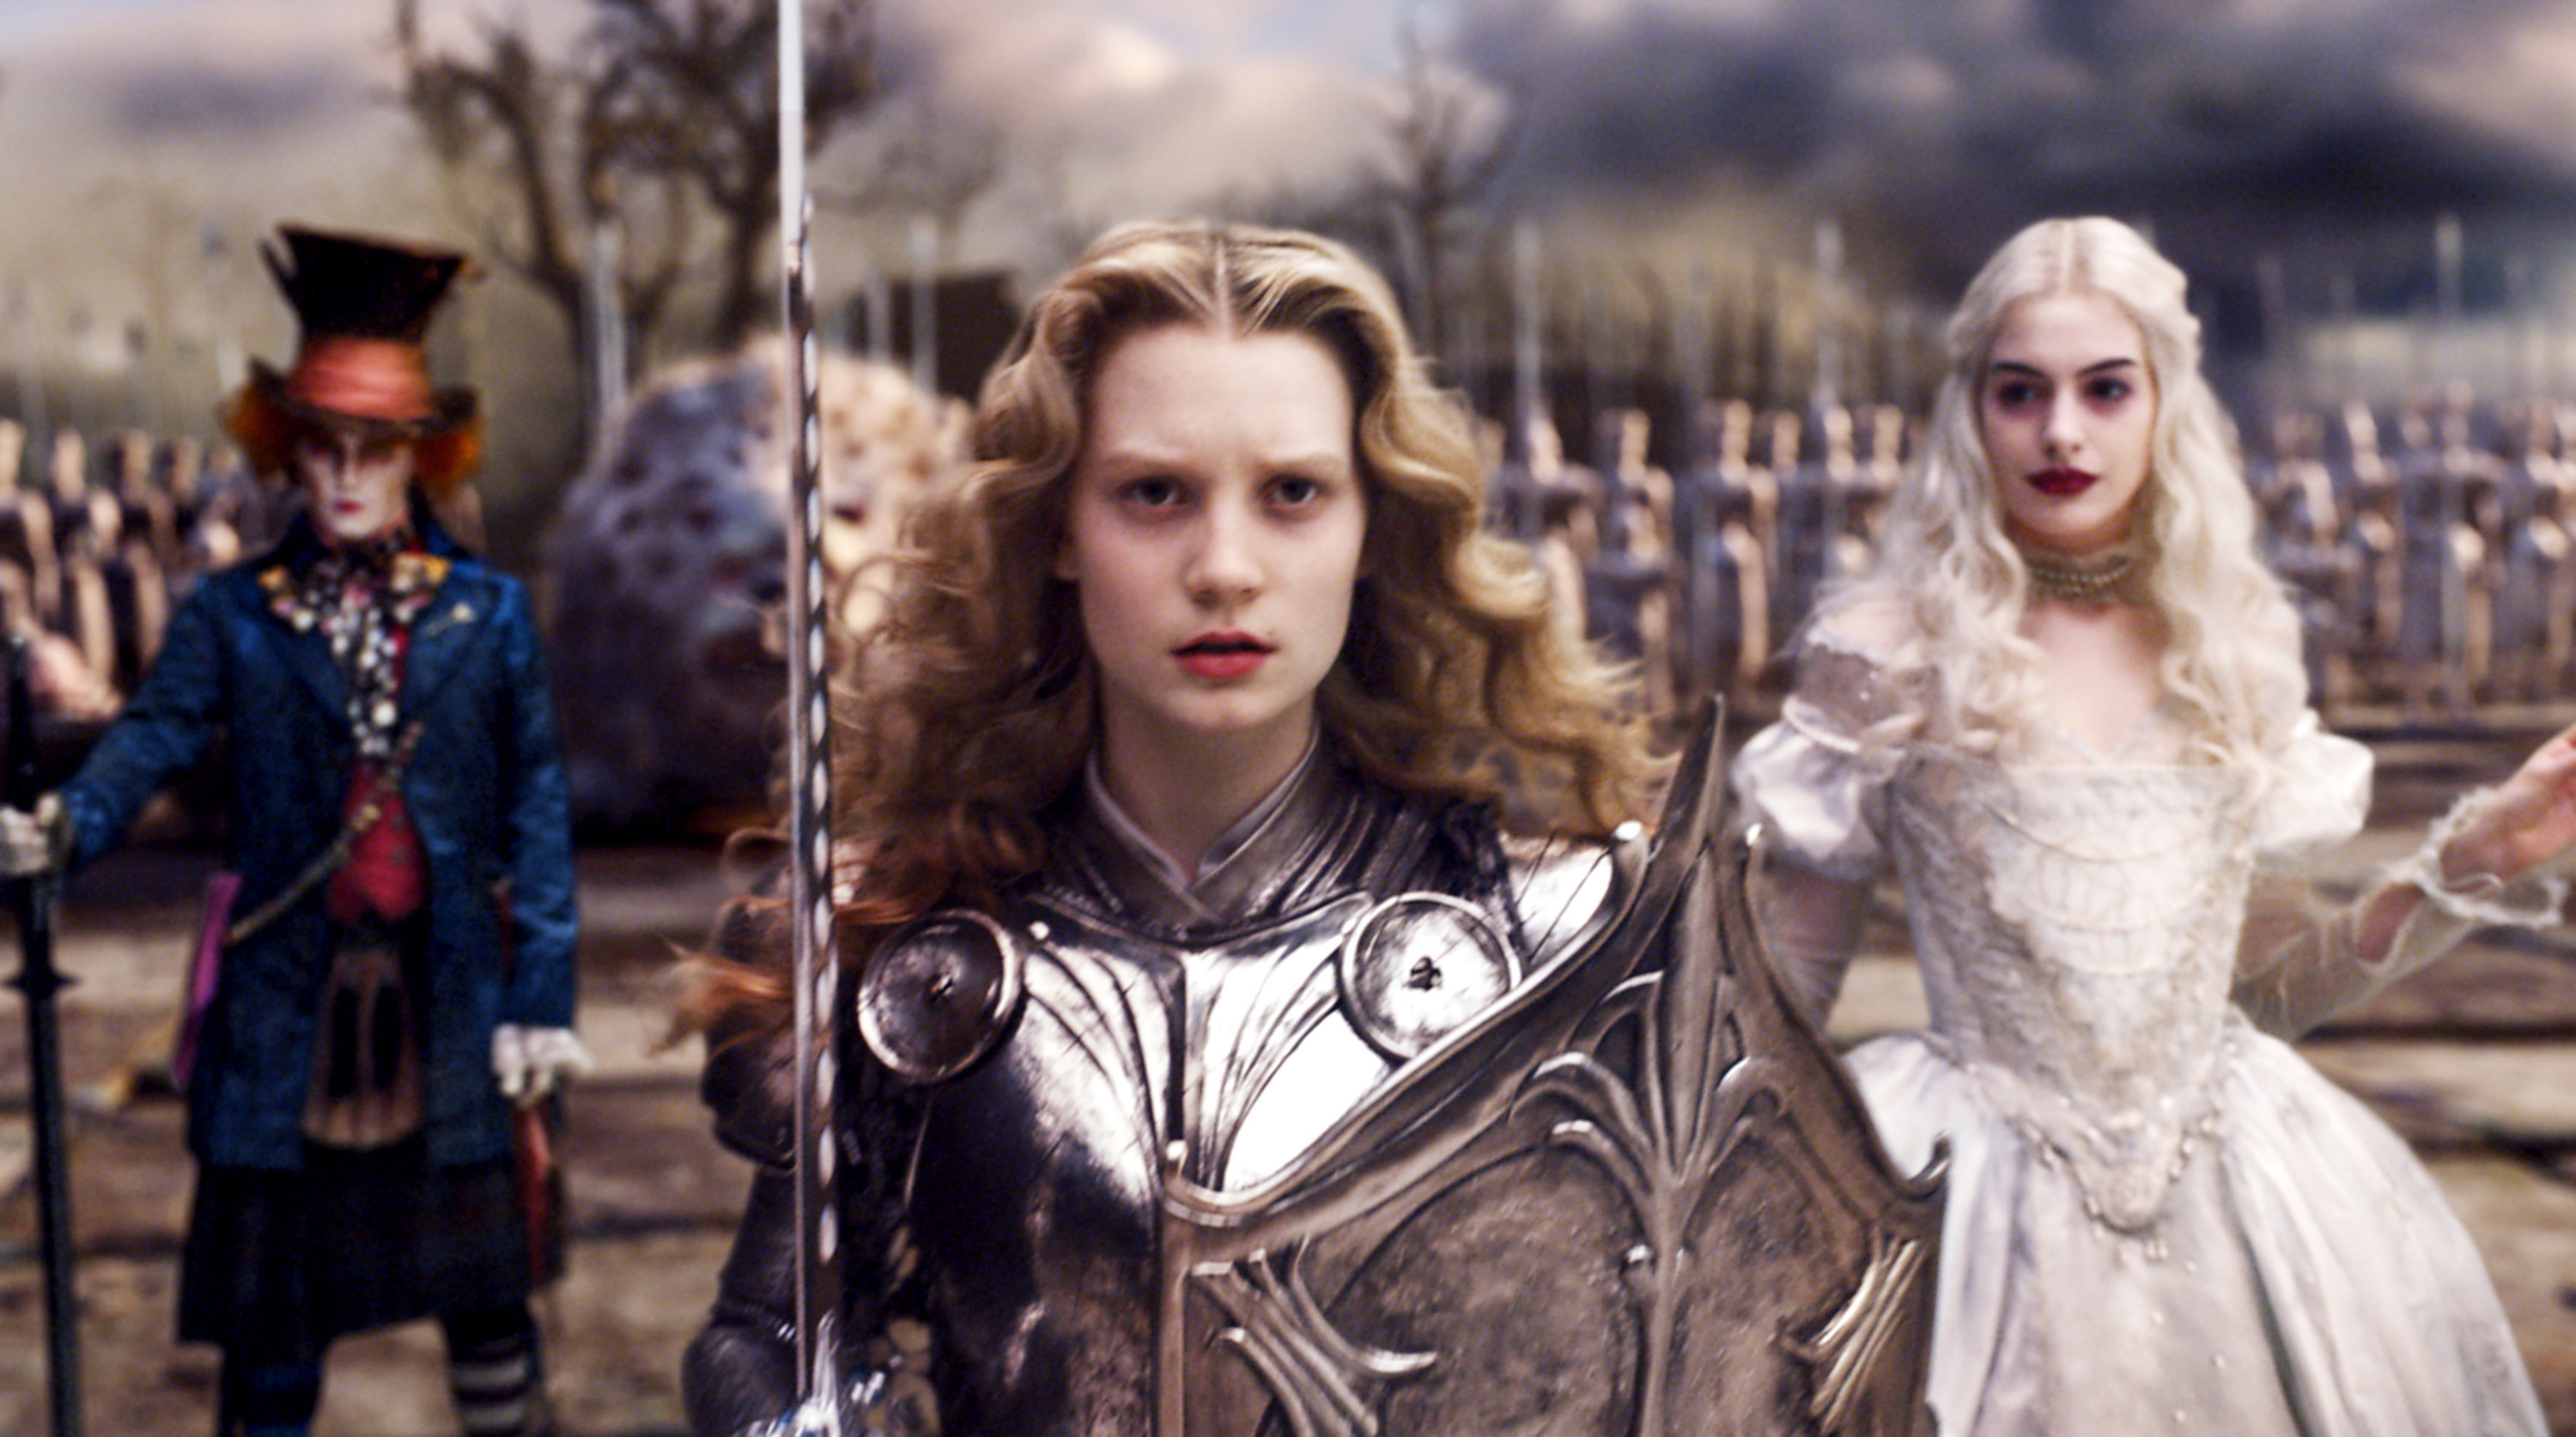 Johnny Depp, Mia Wasikowska, and Anne Hathaway prepare for battle